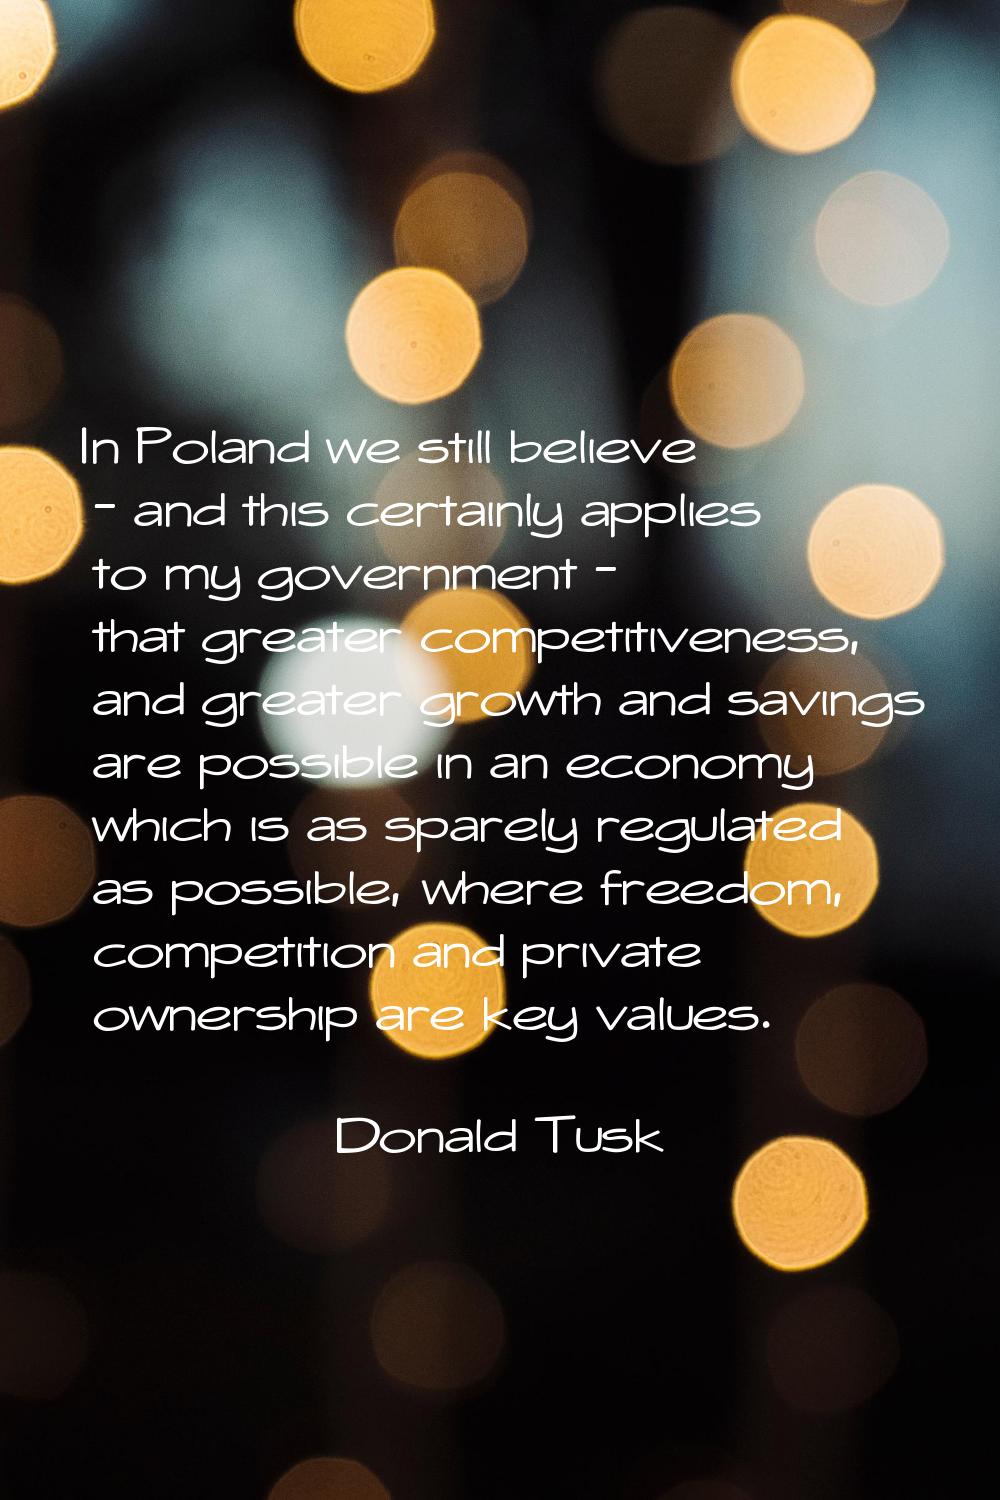 In Poland we still believe - and this certainly applies to my government - that greater competitive